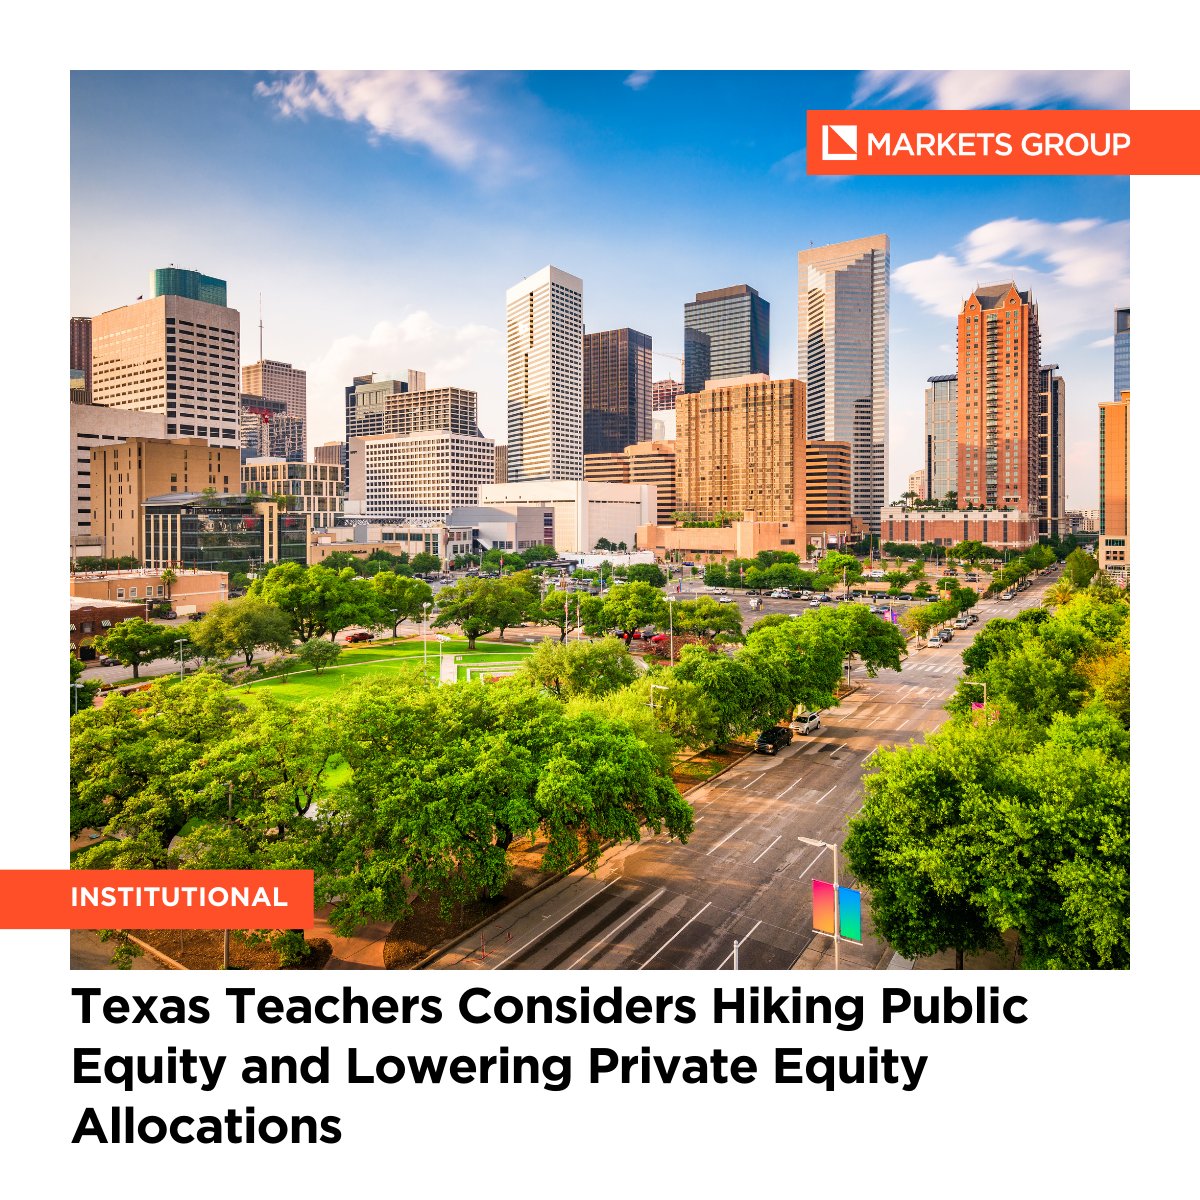 In response to current liquidity needs, the Teacher Retirement System of Texas (TRS) is considering boosting its public equity exposure by reducing its private equity allocation. @muskana_22 has the details: marketsgroup.org/news/Texas-Tea… #marketsgroupnews